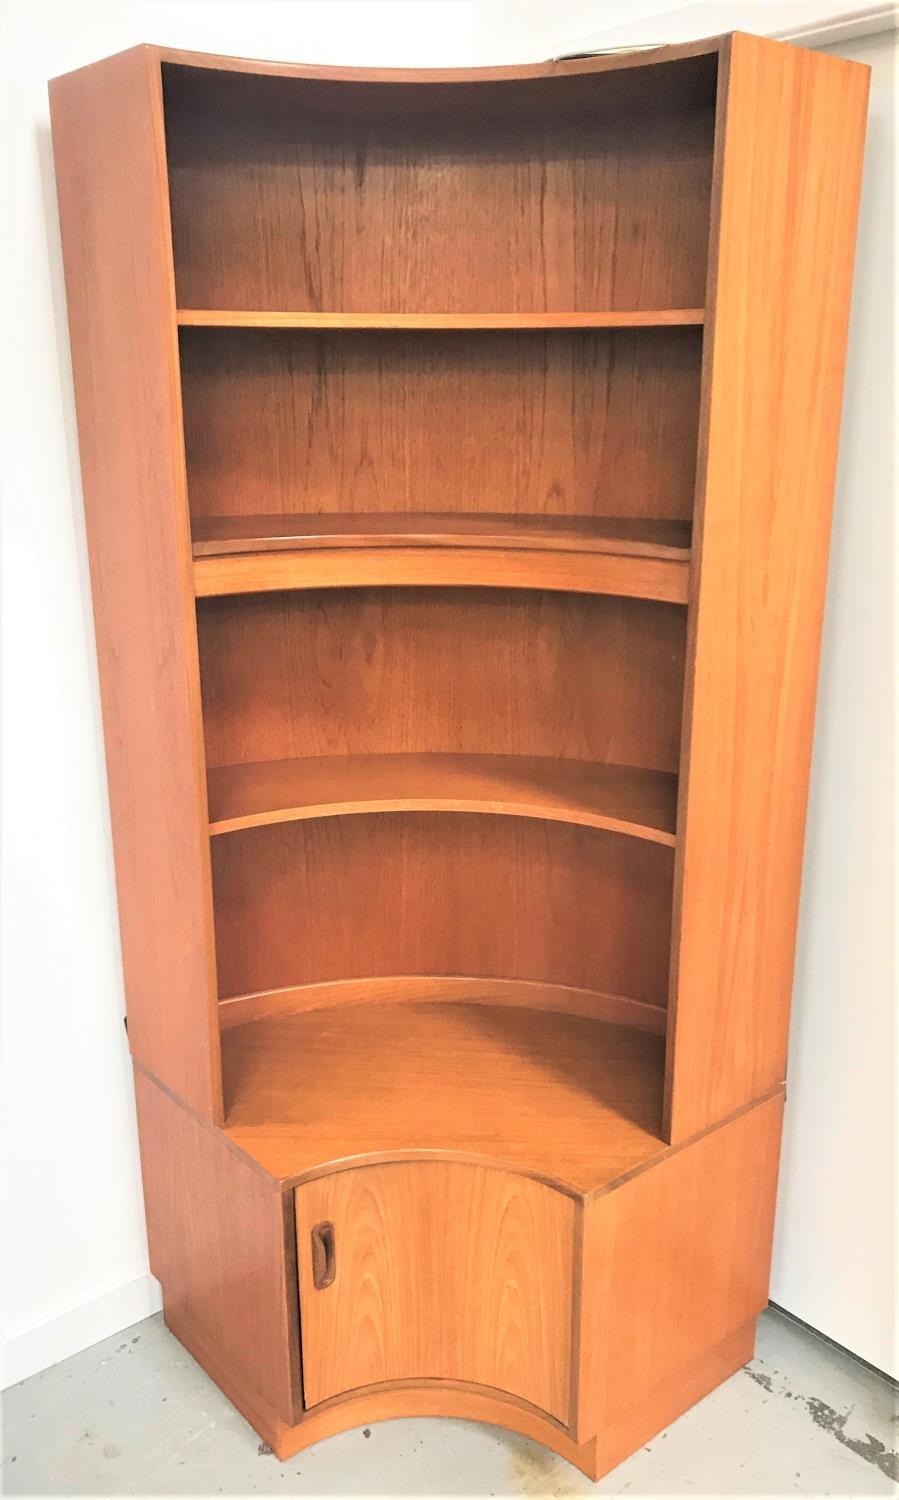 G PLAN ILLUMINATED CURVED TEAK CORNER UNIT with a plain top above three curved shelves, the base